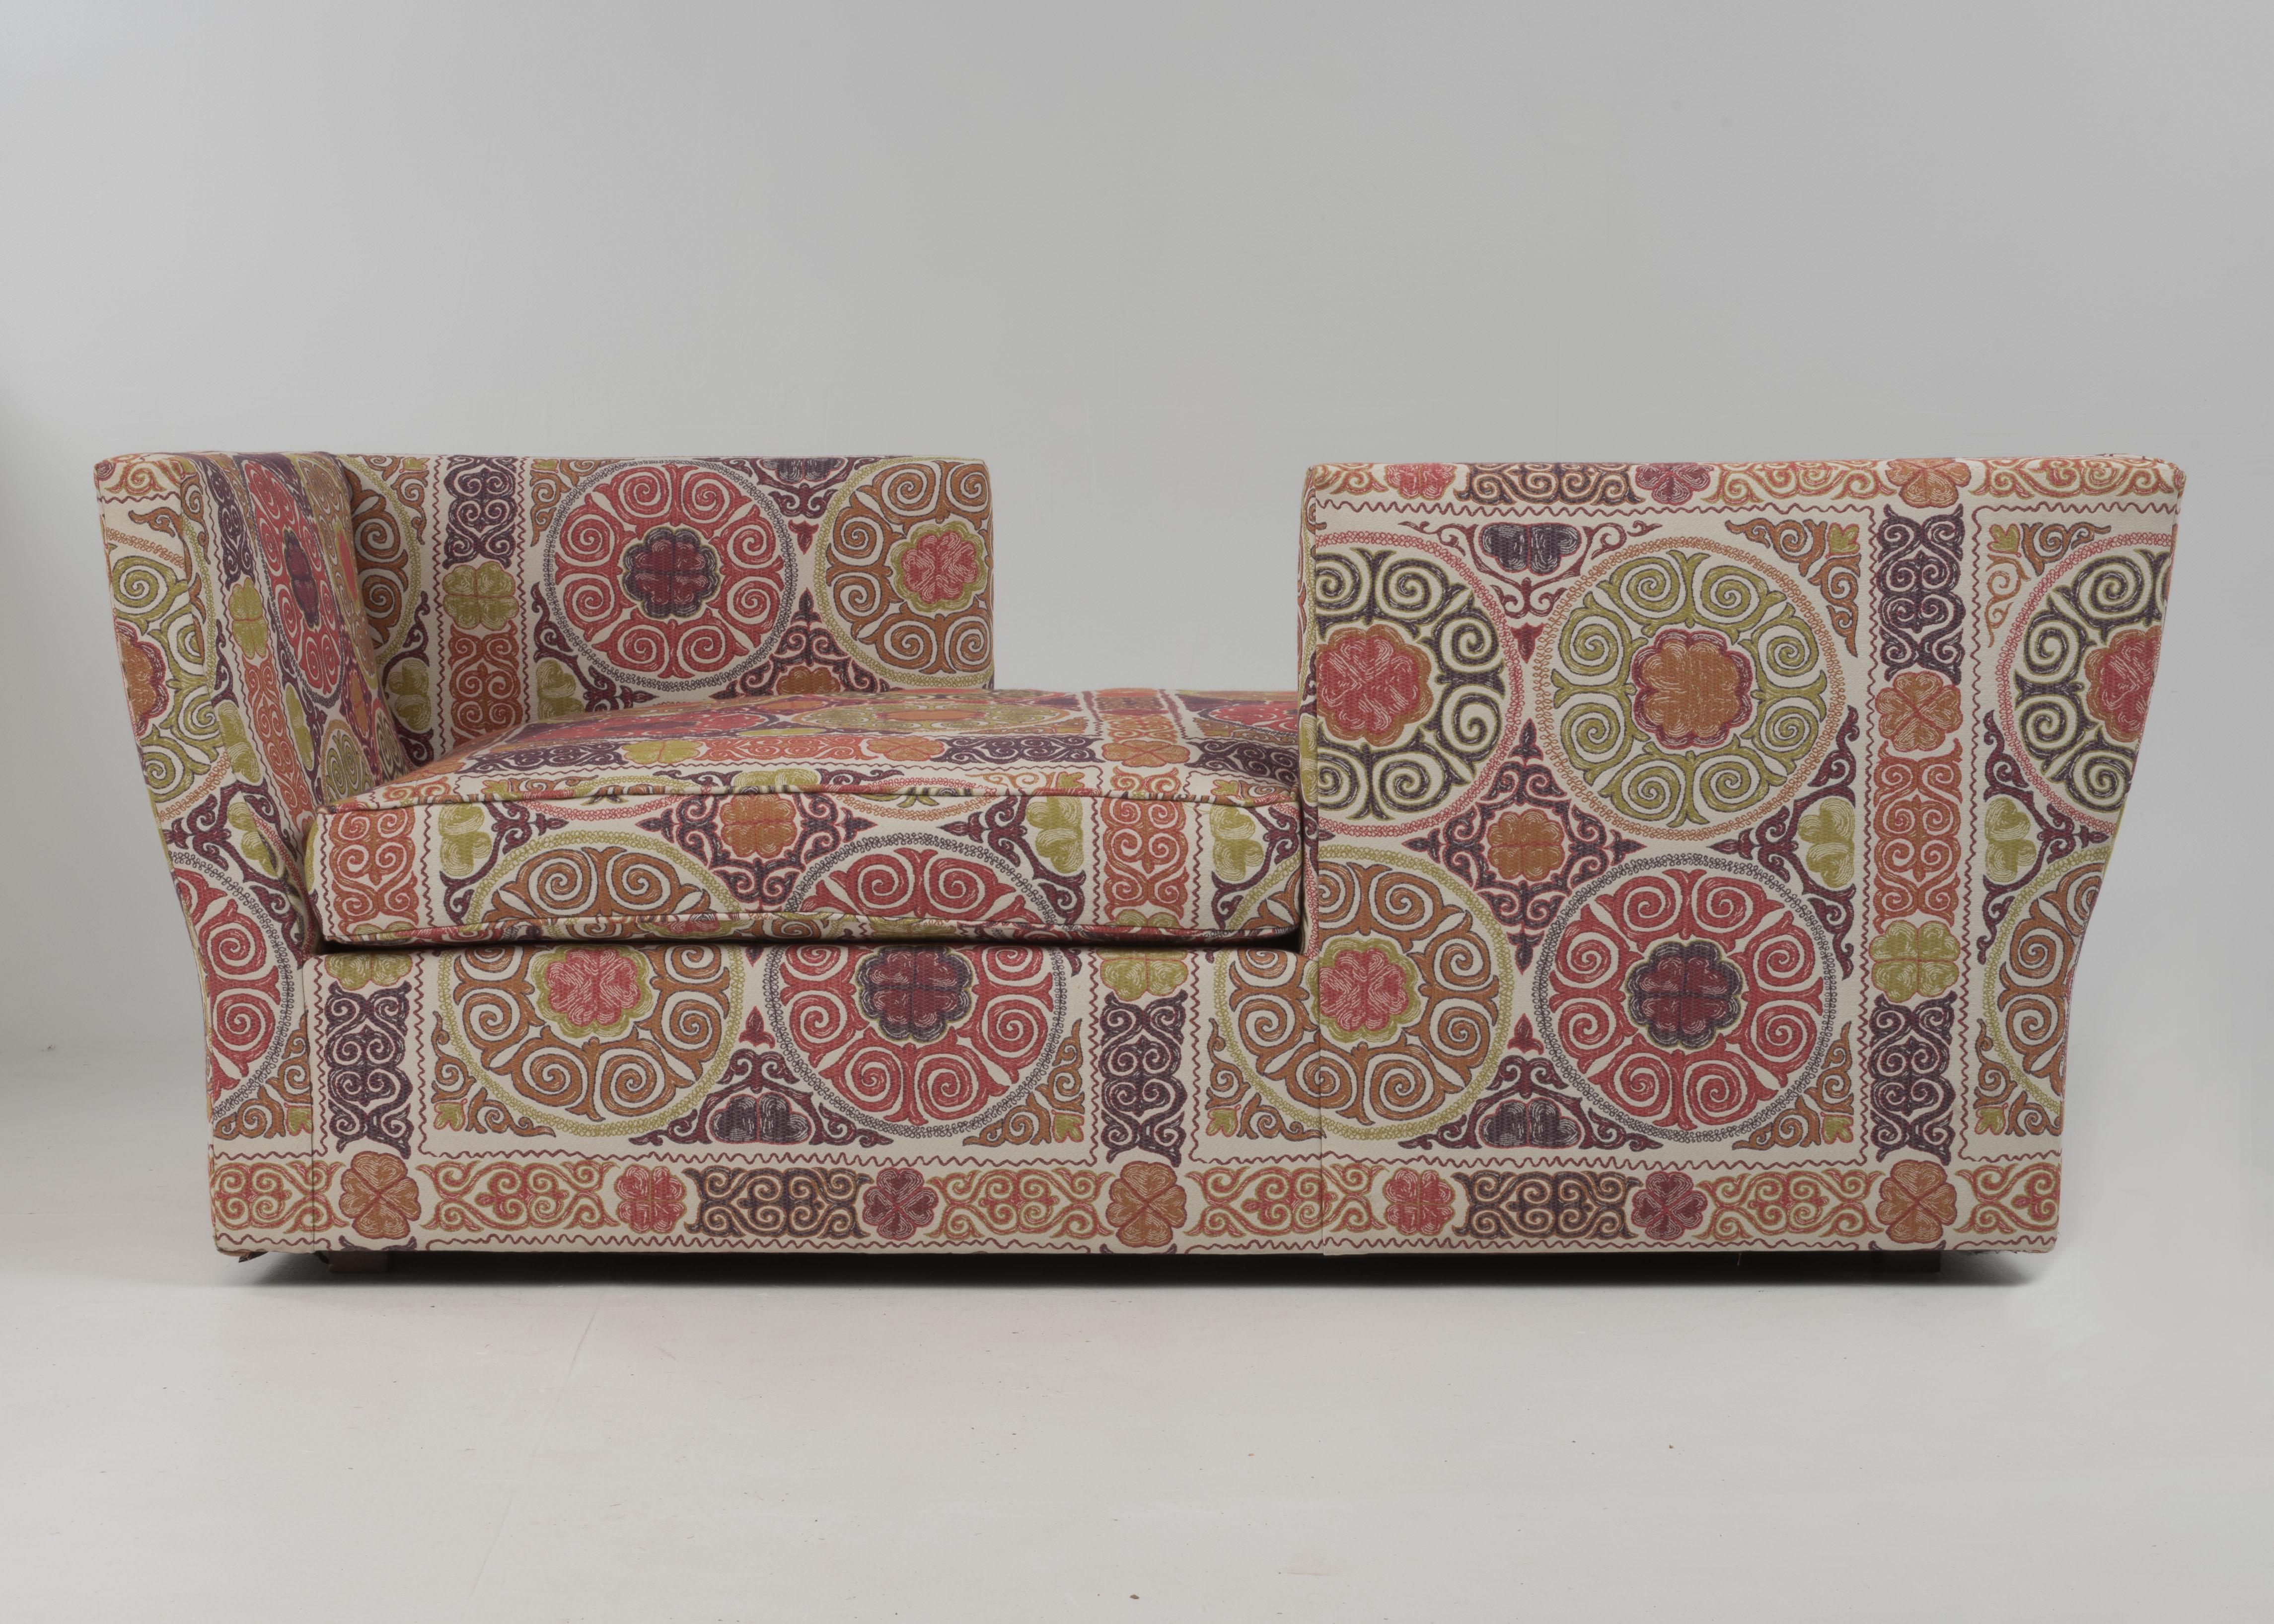 Late 20th Century Show Stopper Custom Tete a Tete Sofa with Suzani Upholstery